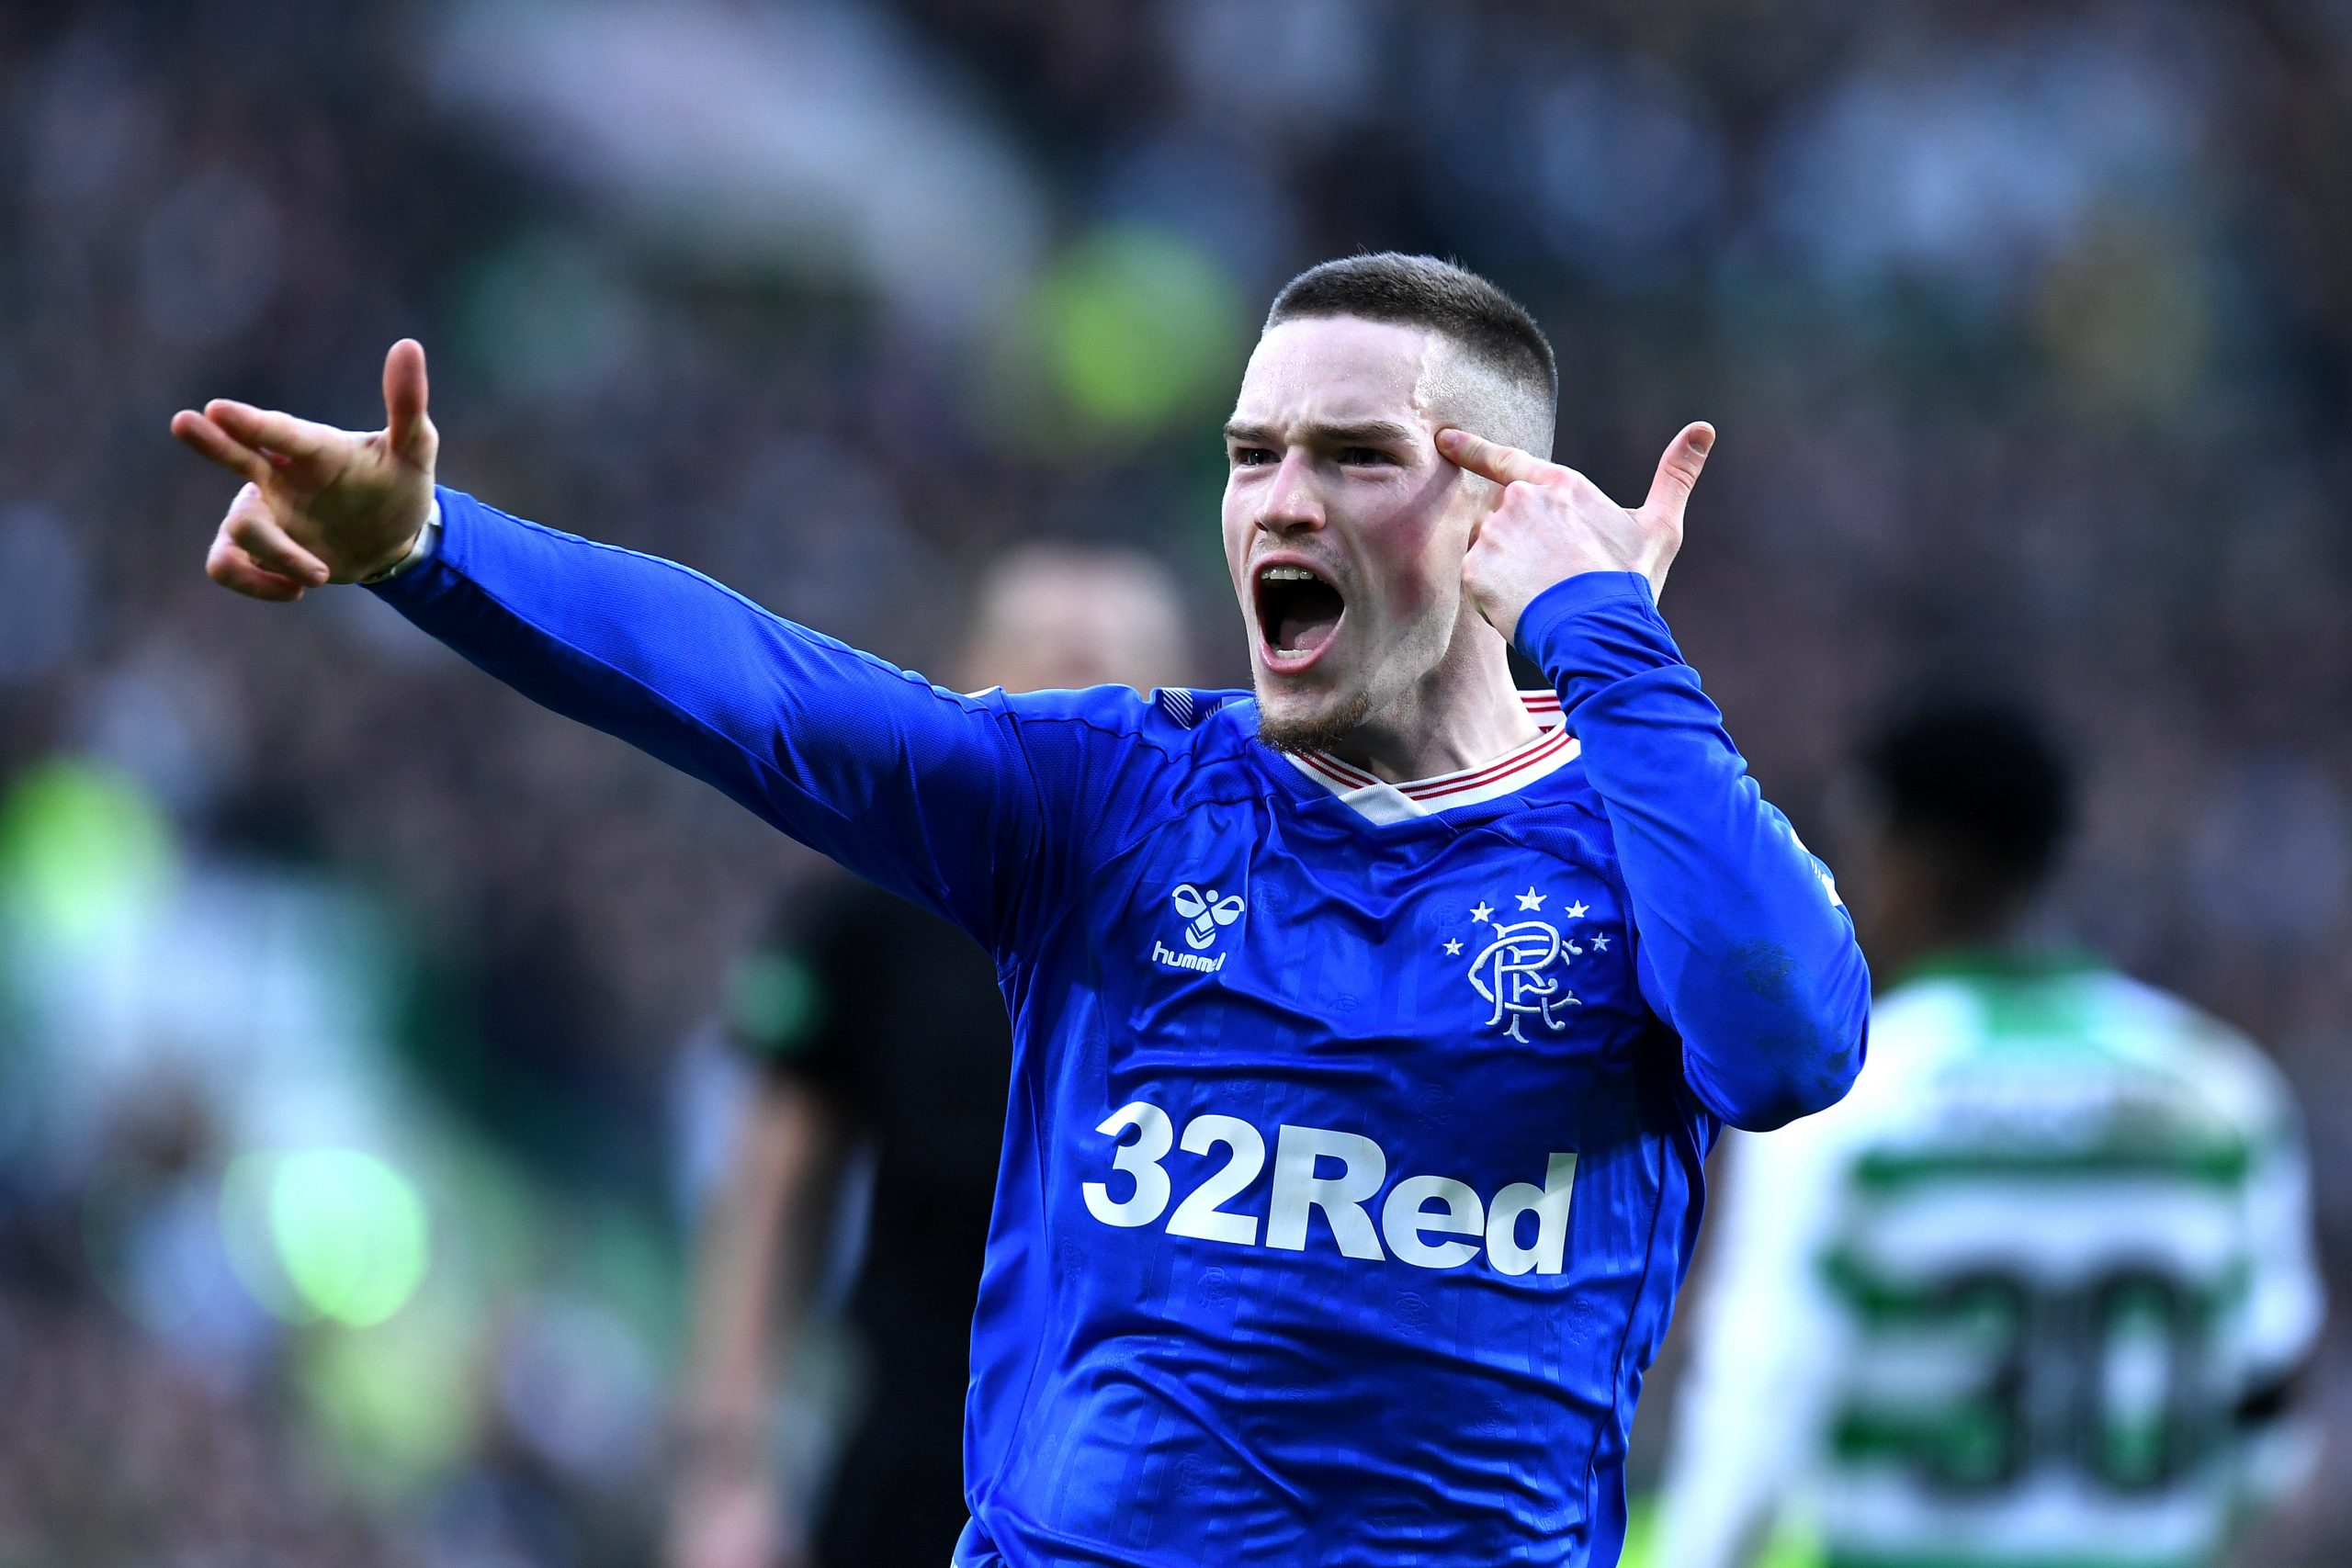 GLASGOW, SCOTLAND - DECEMBER 29: Ryan Kent of Rangers celebrates after scoring his sides first goal during the Ladbrokes Premiership match between Celtic and Rangers at Celtic Park on December 29, 2019 in Glasgow, Scotland.